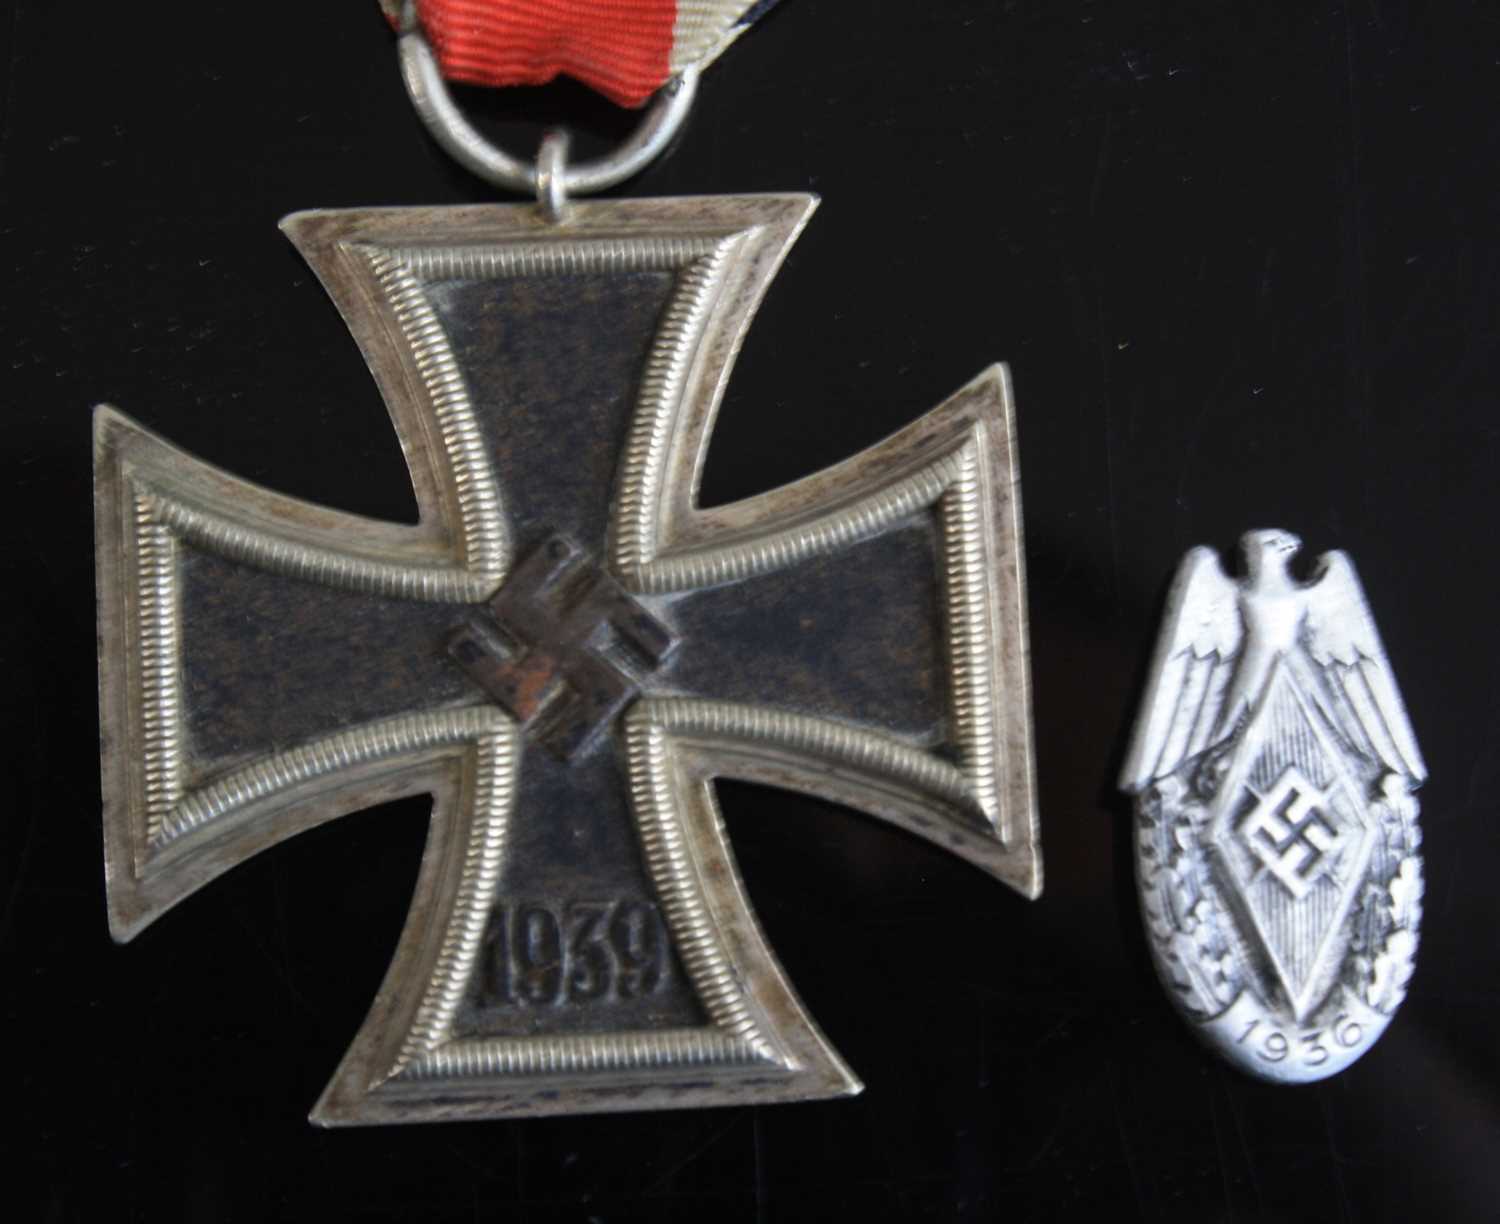 A German Third Reich Iron Cross 2nd class, marked to the suspension ring 65 for Klein and Quenzer